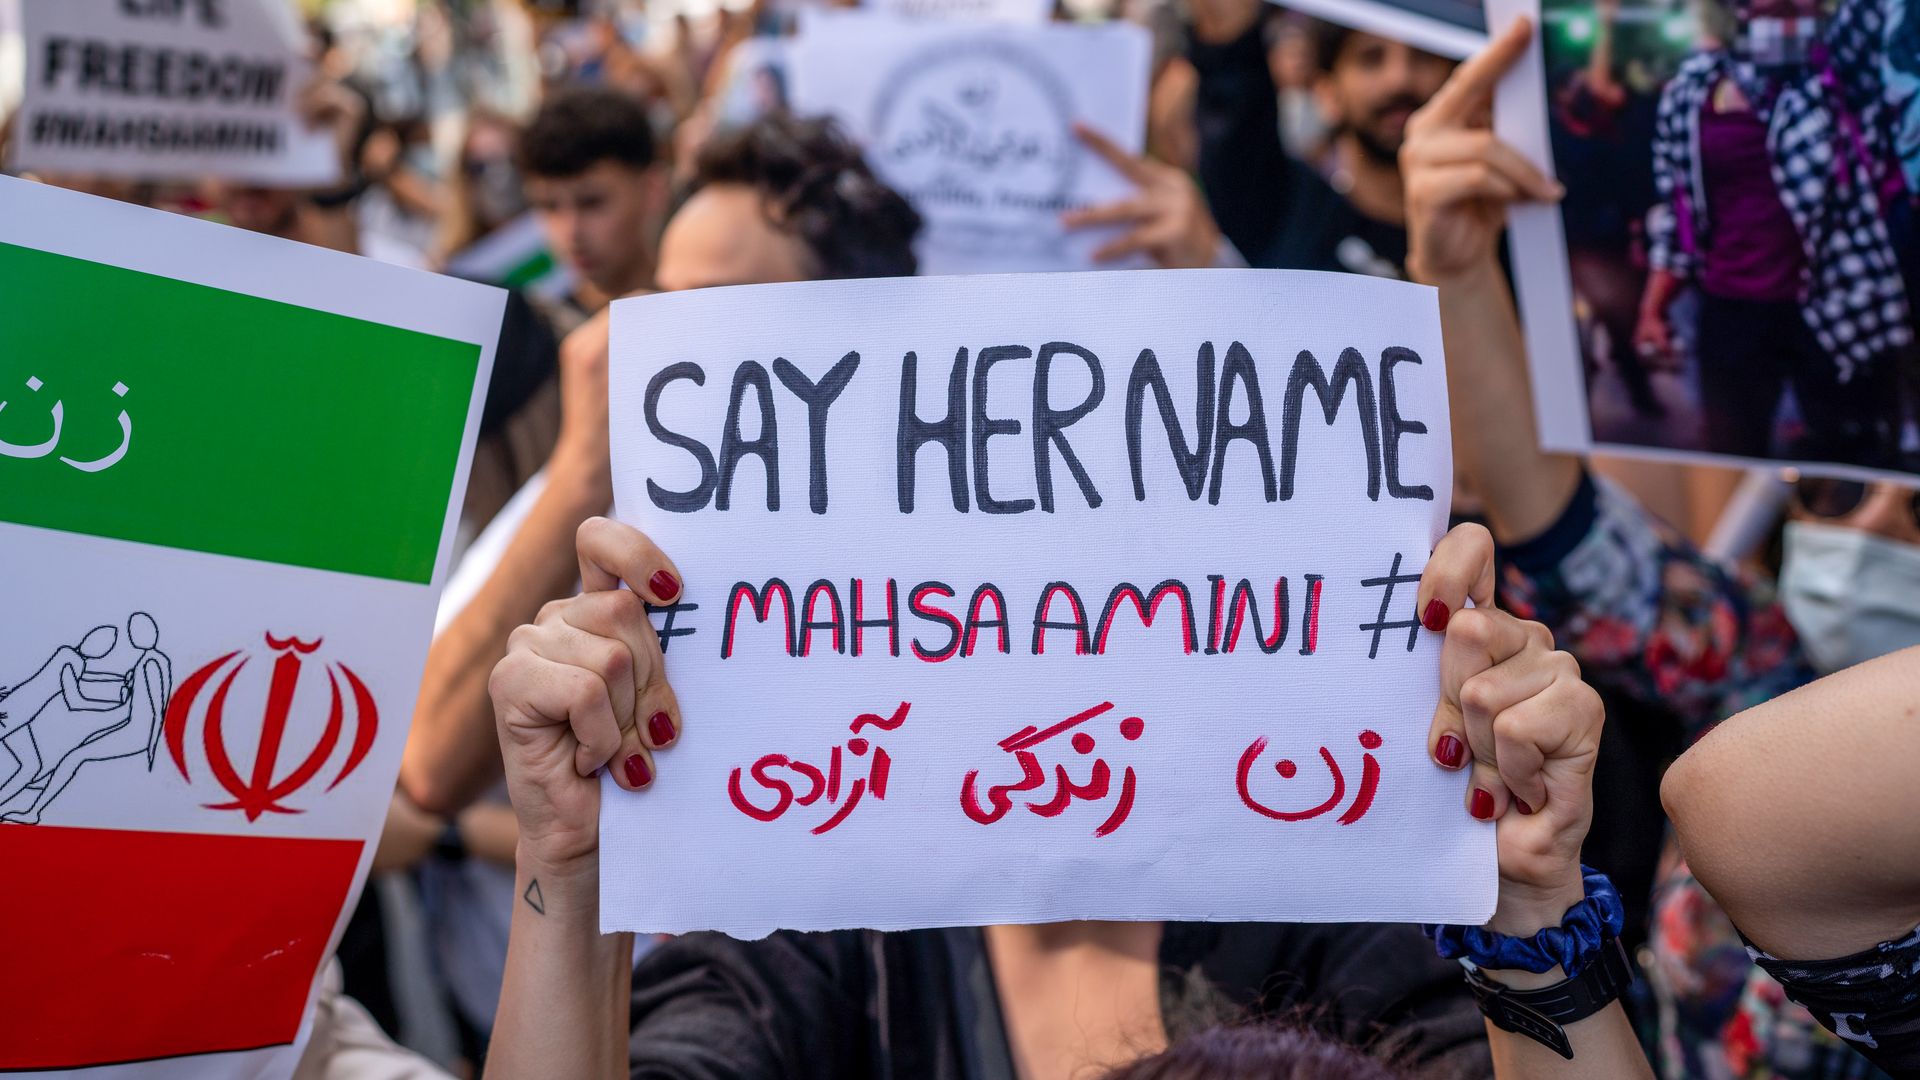 Protester holding a sign reading "Say her name: Mahsa Amini"